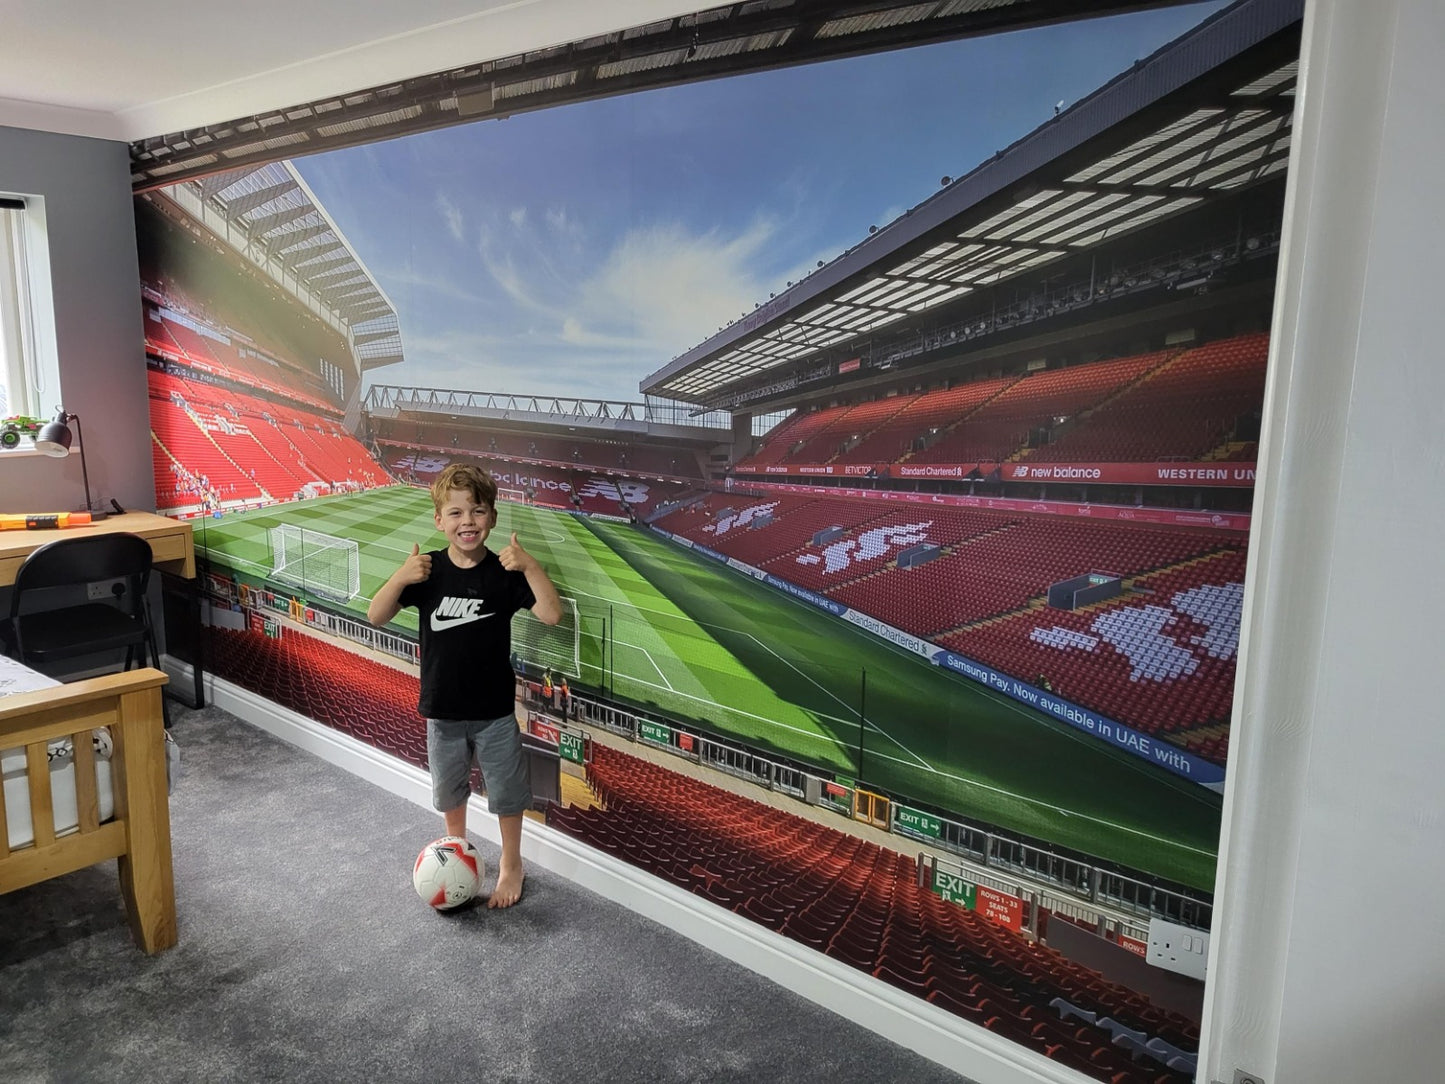 Liverpool FC Anfield Stadium Full Wall Mural - View From The Kop Image